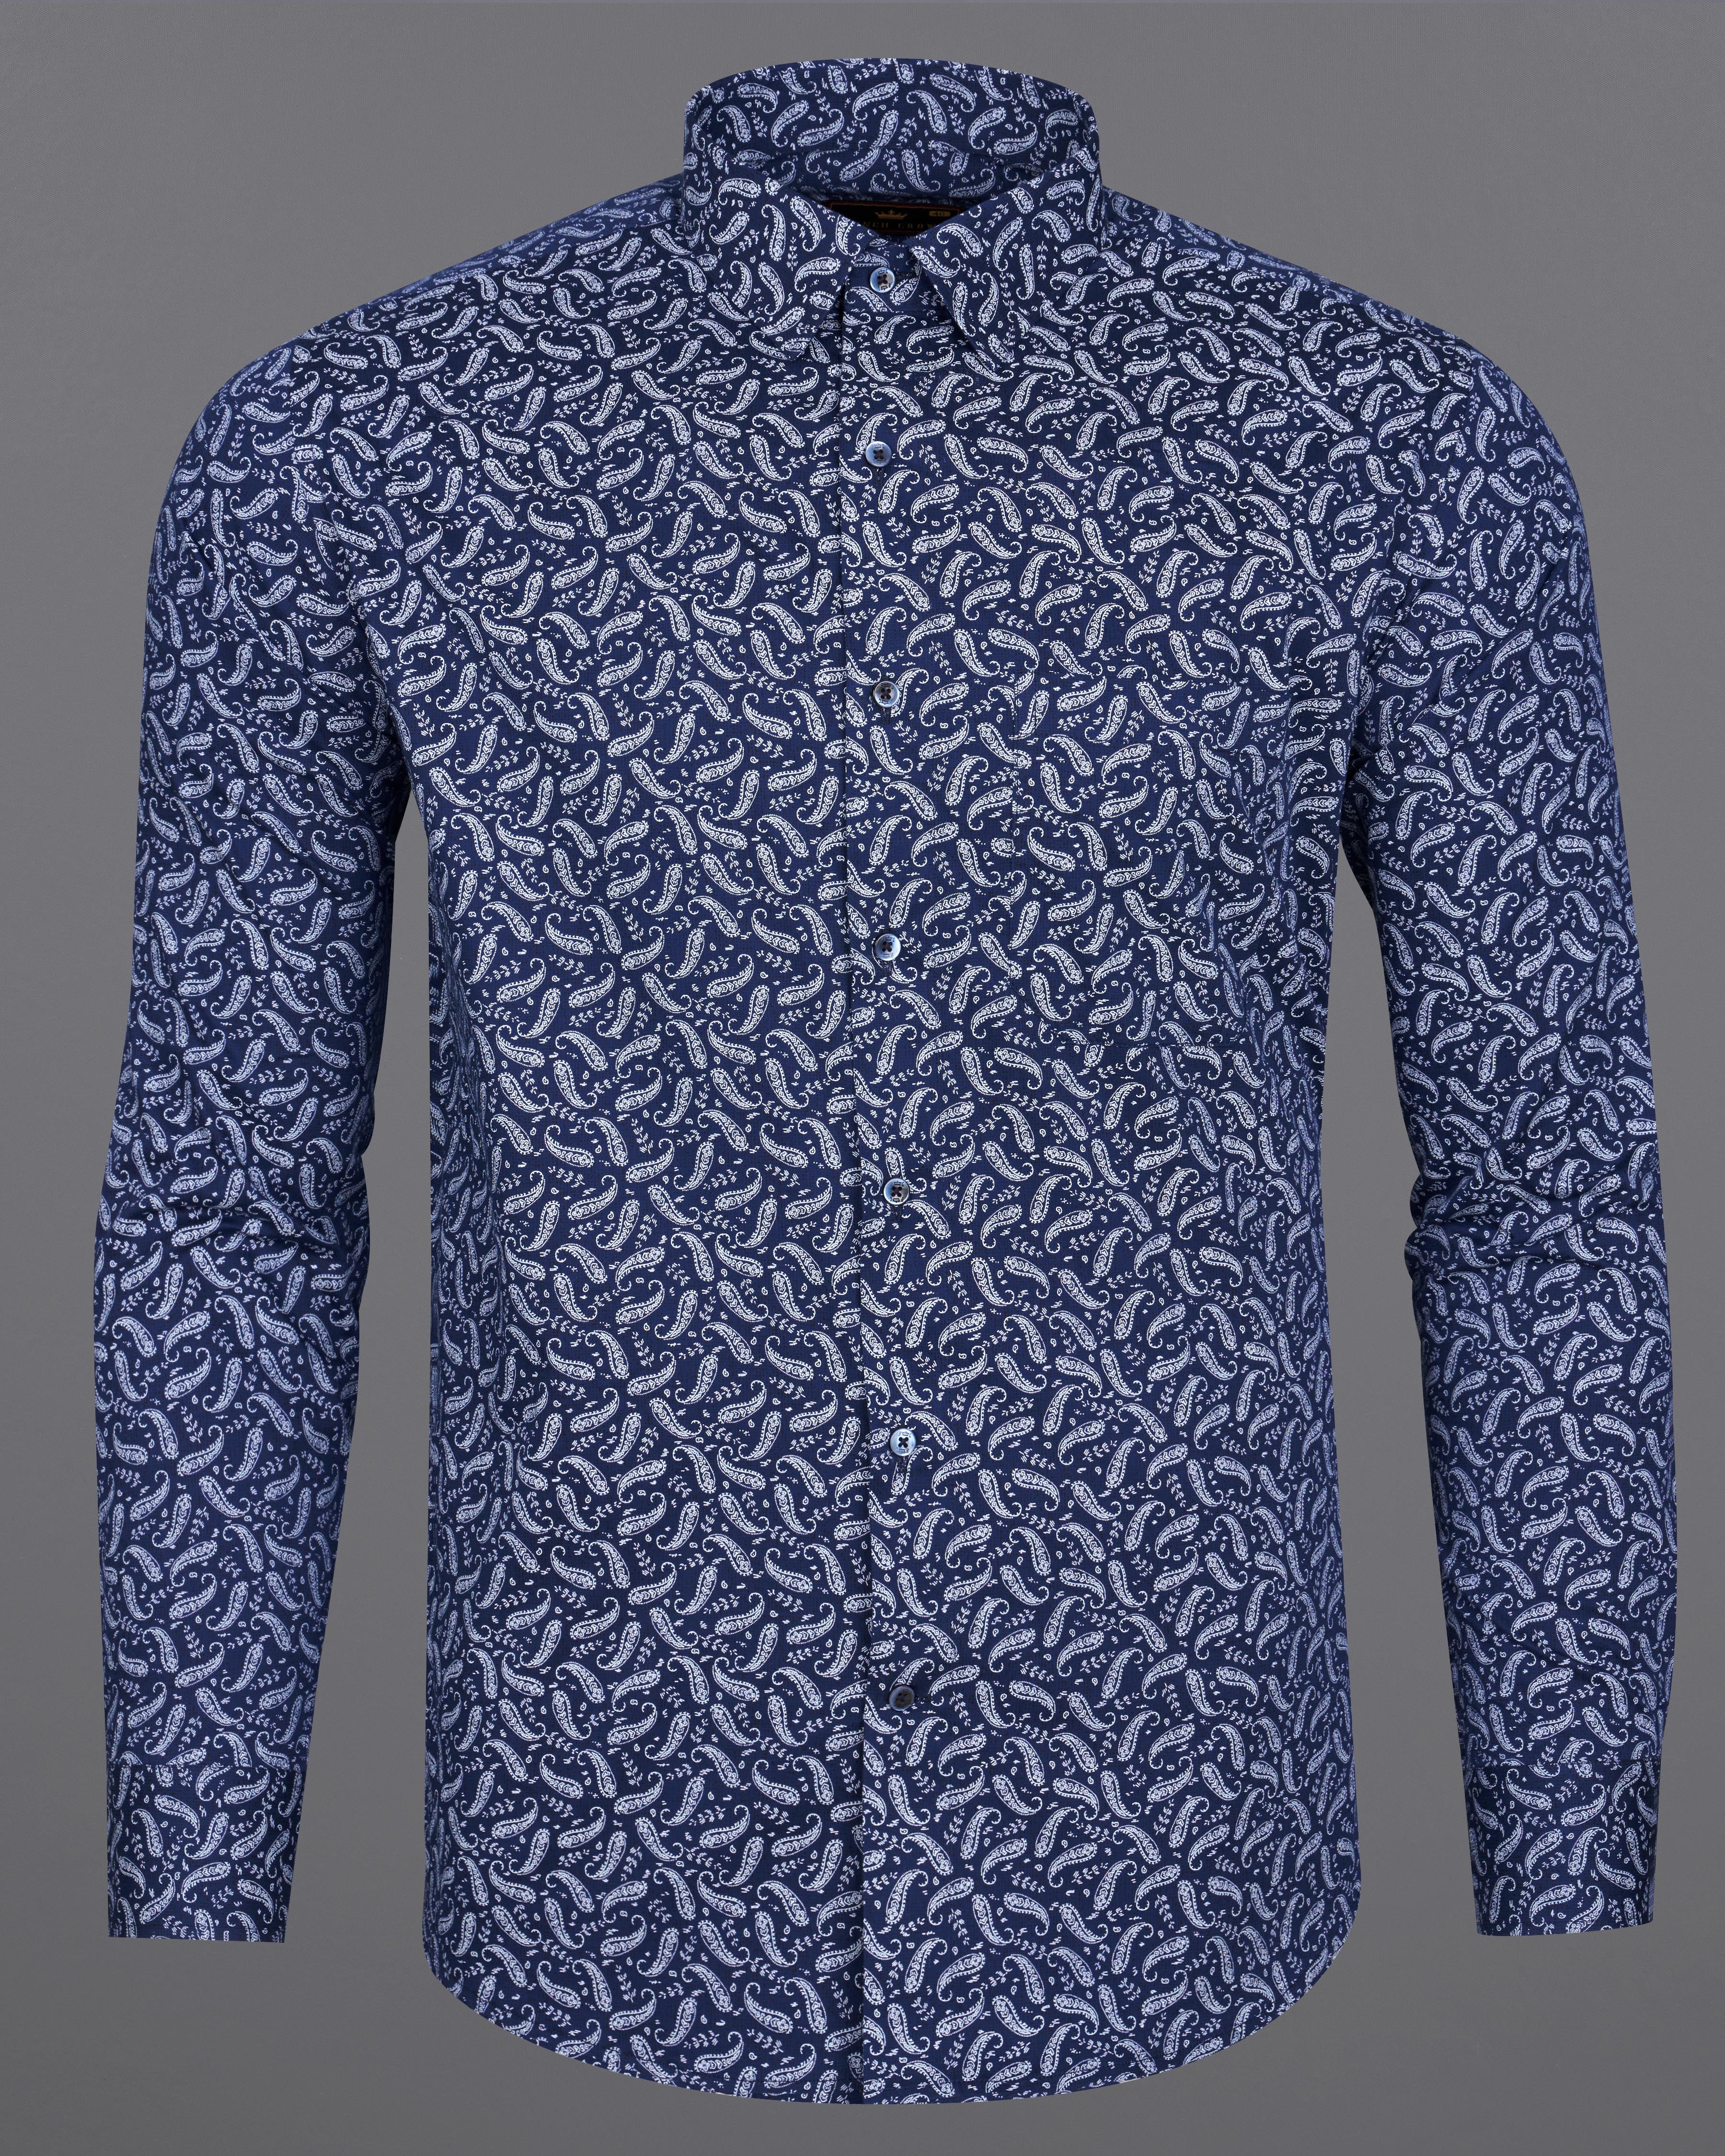 Biscay Blue Paisley Textured Royal Oxford Shirt 9261-BLE-38,9261-BLE-H-38,9261-BLE-39,9261-BLE-H-39,9261-BLE-40,9261-BLE-H-40,9261-BLE-42,9261-BLE-H-42,9261-BLE-44,9261-BLE-H-44,9261-BLE-46,9261-BLE-H-46,9261-BLE-48,9261-BLE-H-48,9261-BLE-50,9261-BLE-H-50,9261-BLE-52,9261-BLE-H-52